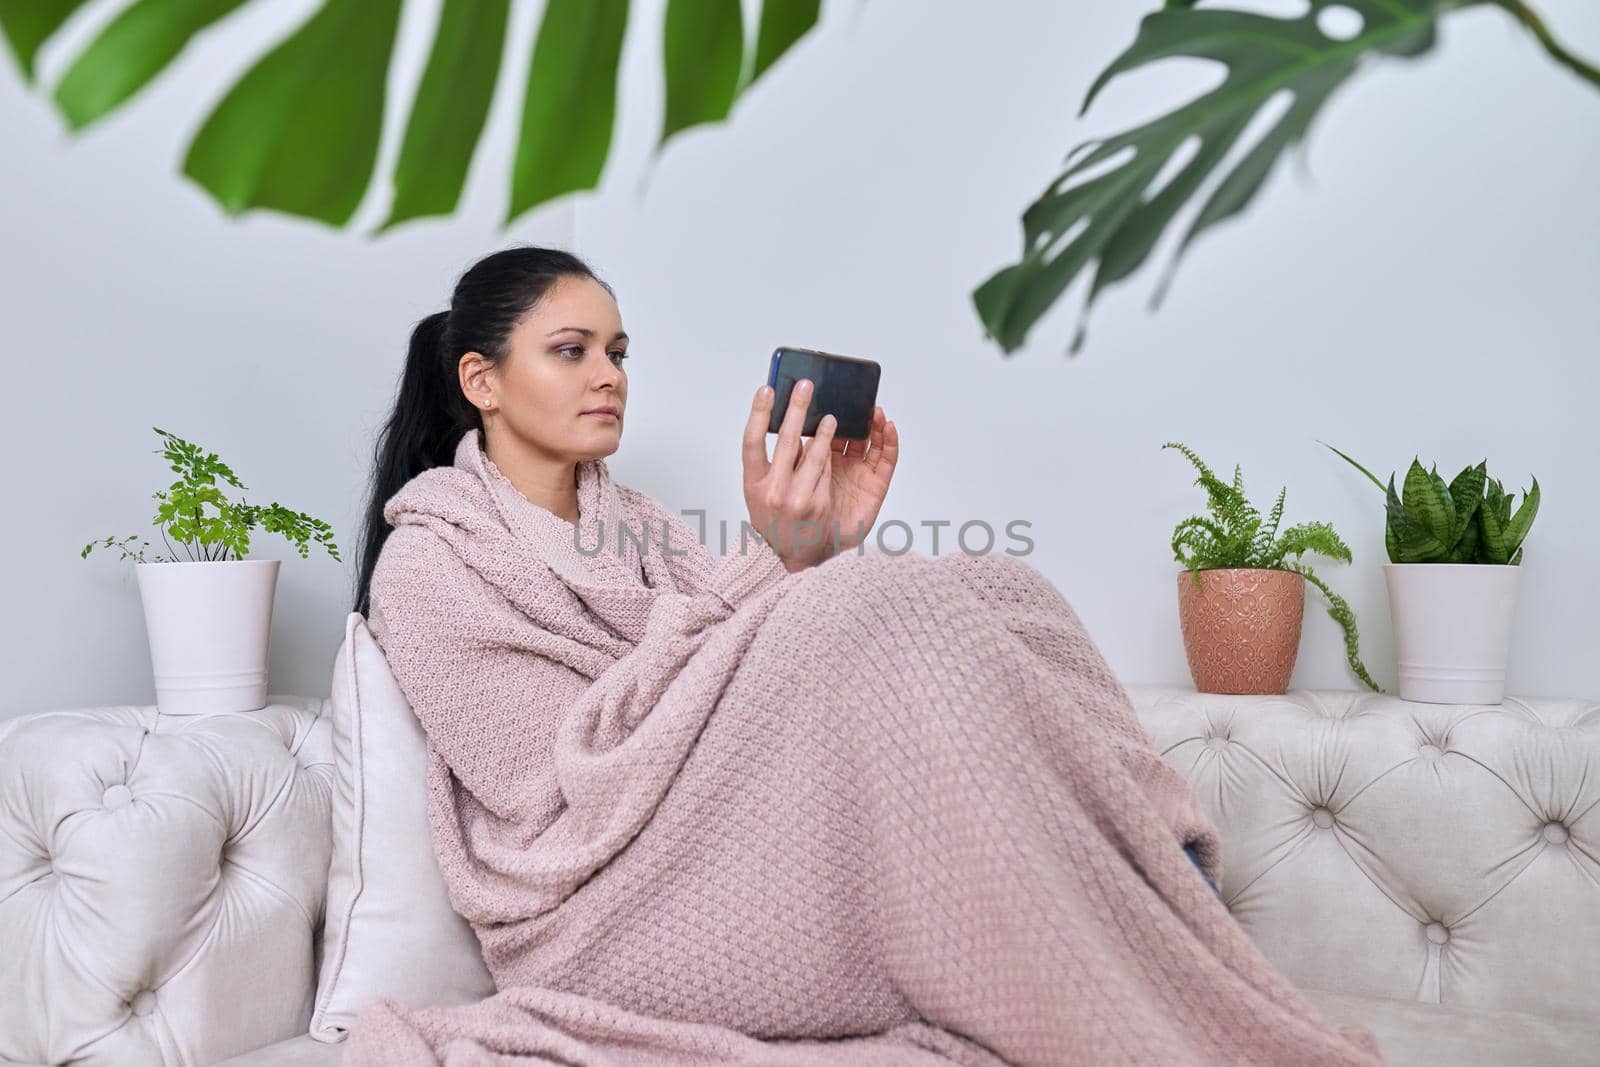 Middle-aged woman having a rest at home in winter fall season. A female under a warm knitted blanket with a smartphone